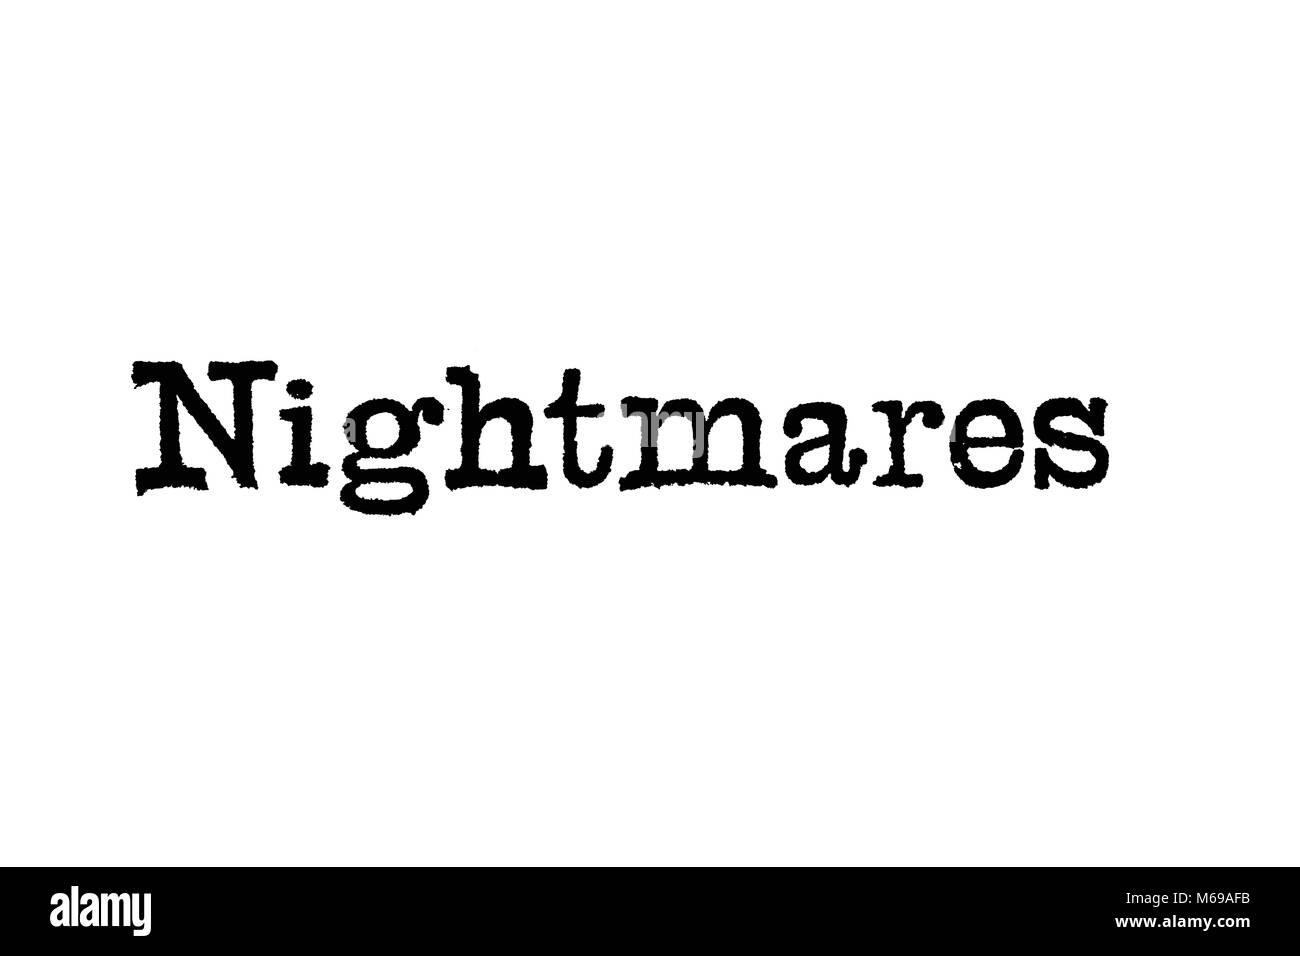 The word Nightmares from a typewriter on a white background Stock Photo